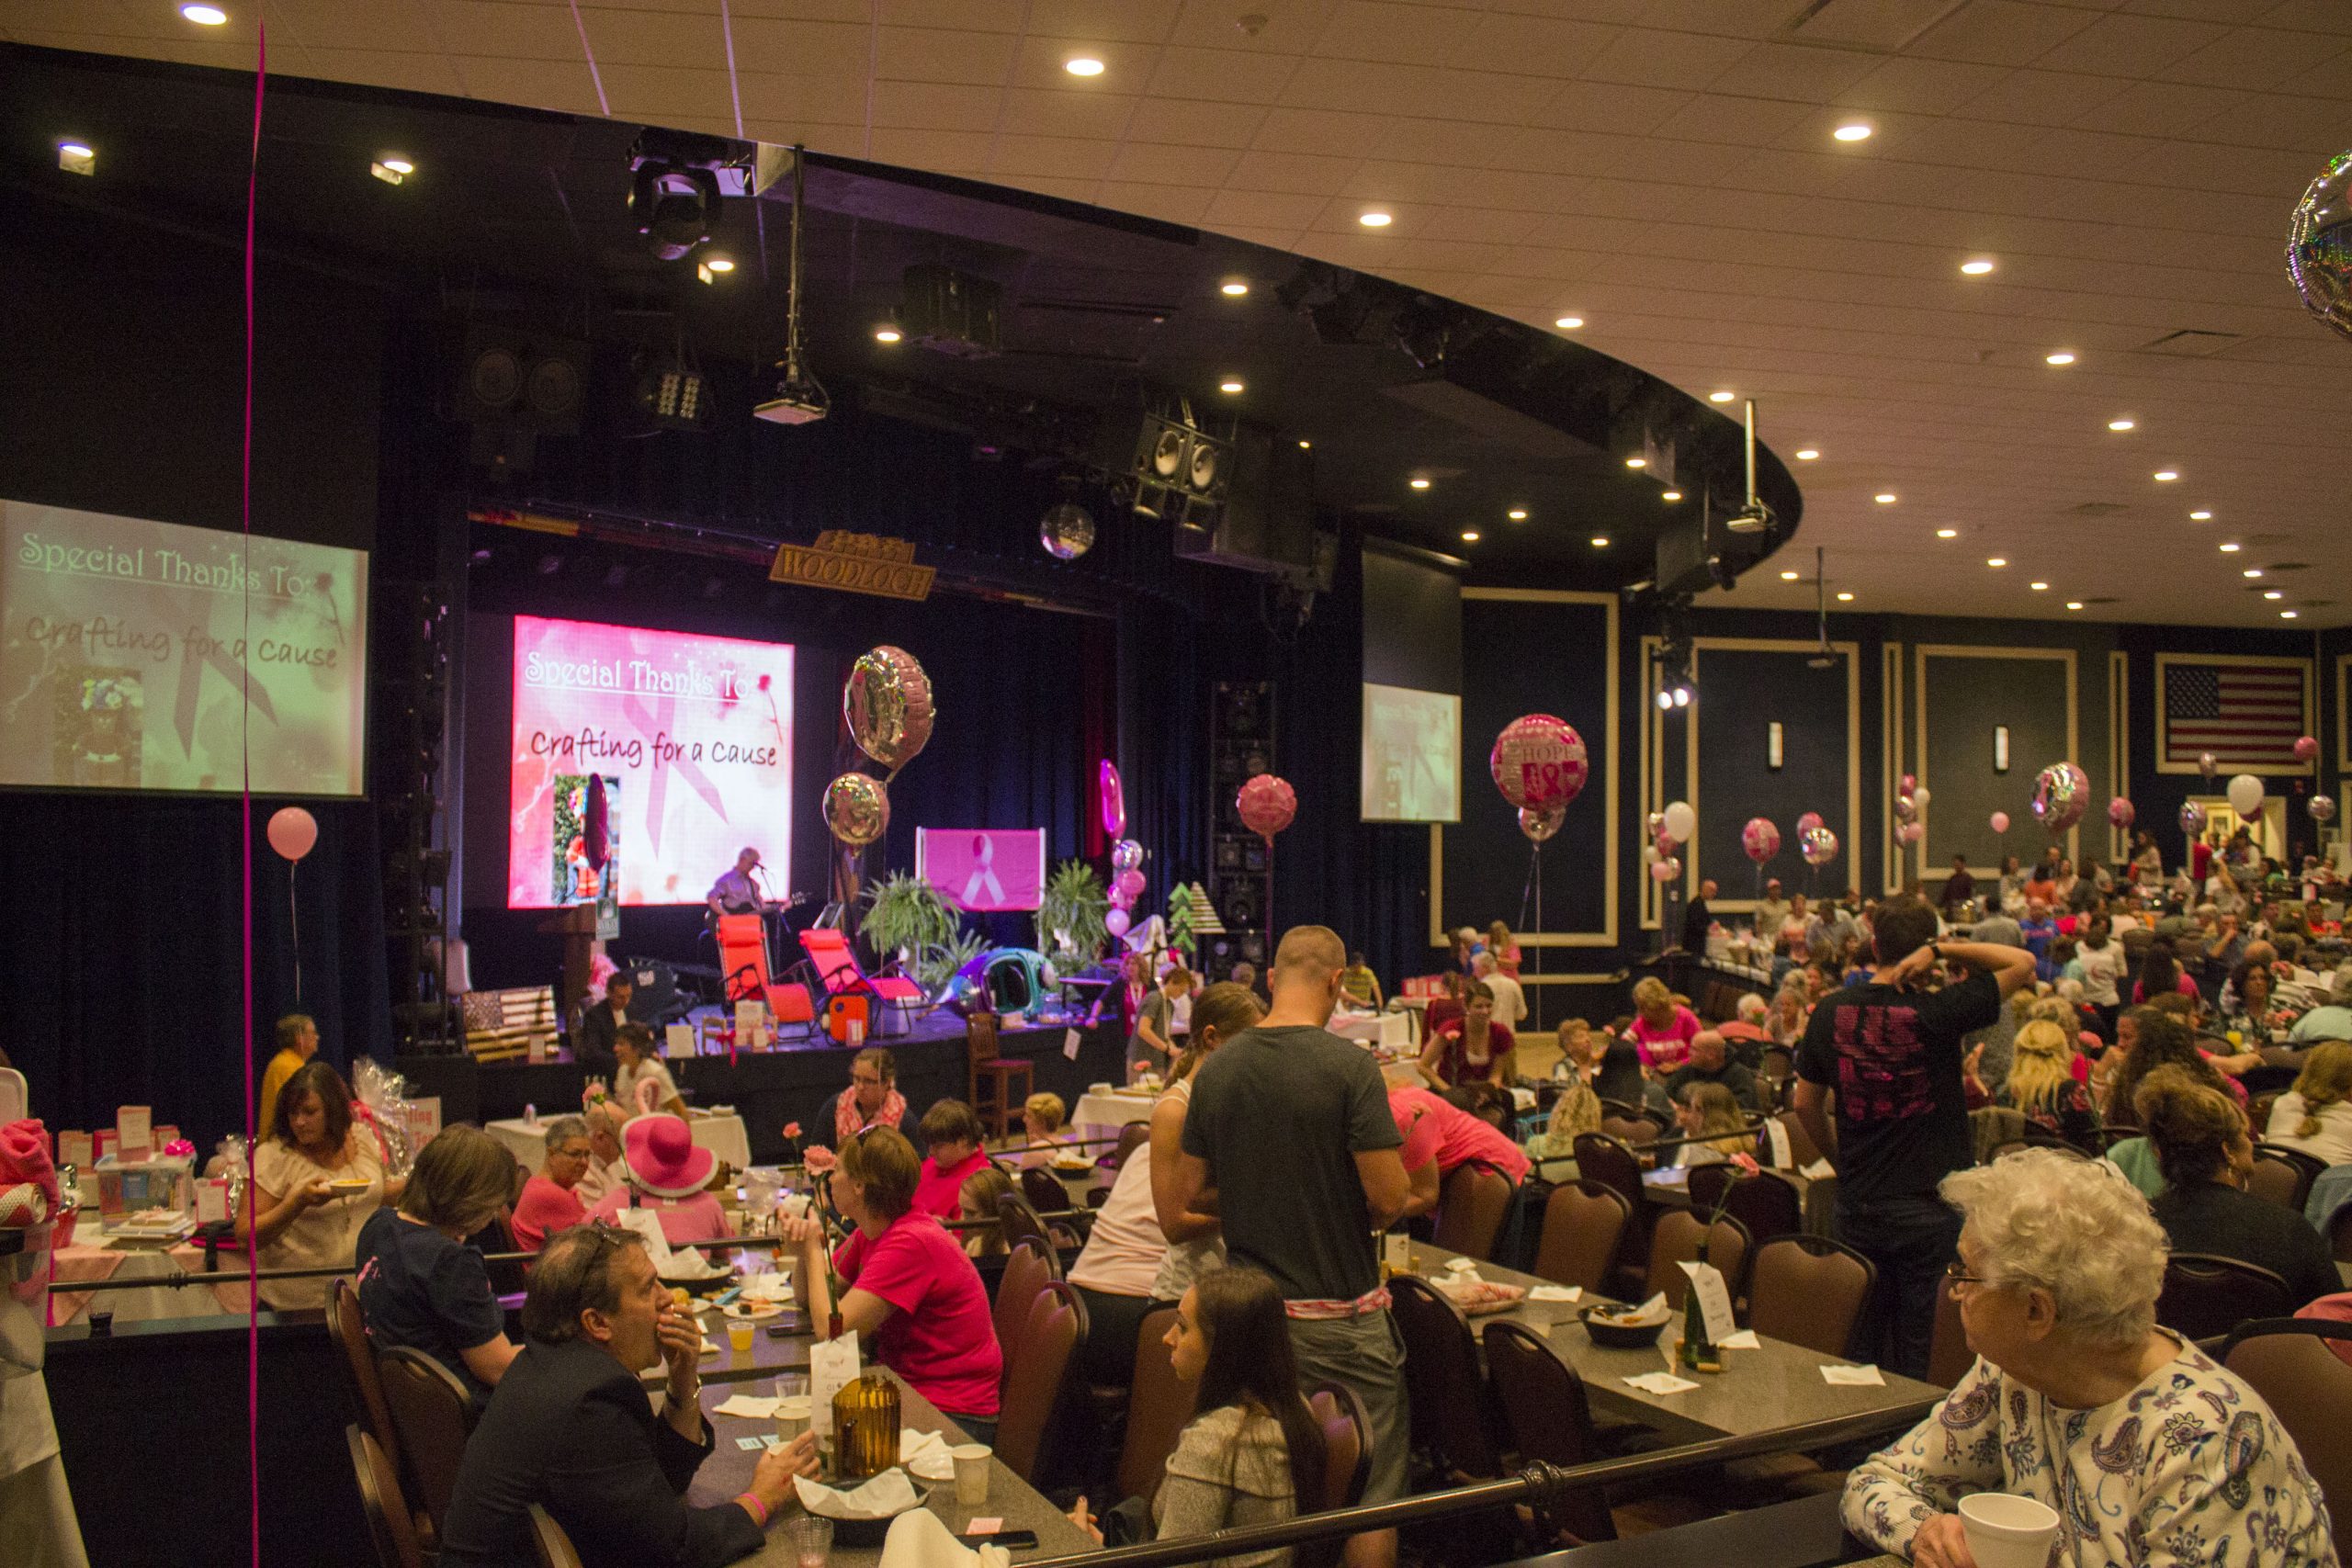 Woodloch Resort to Host 12th Annual “A Night for the Cure”